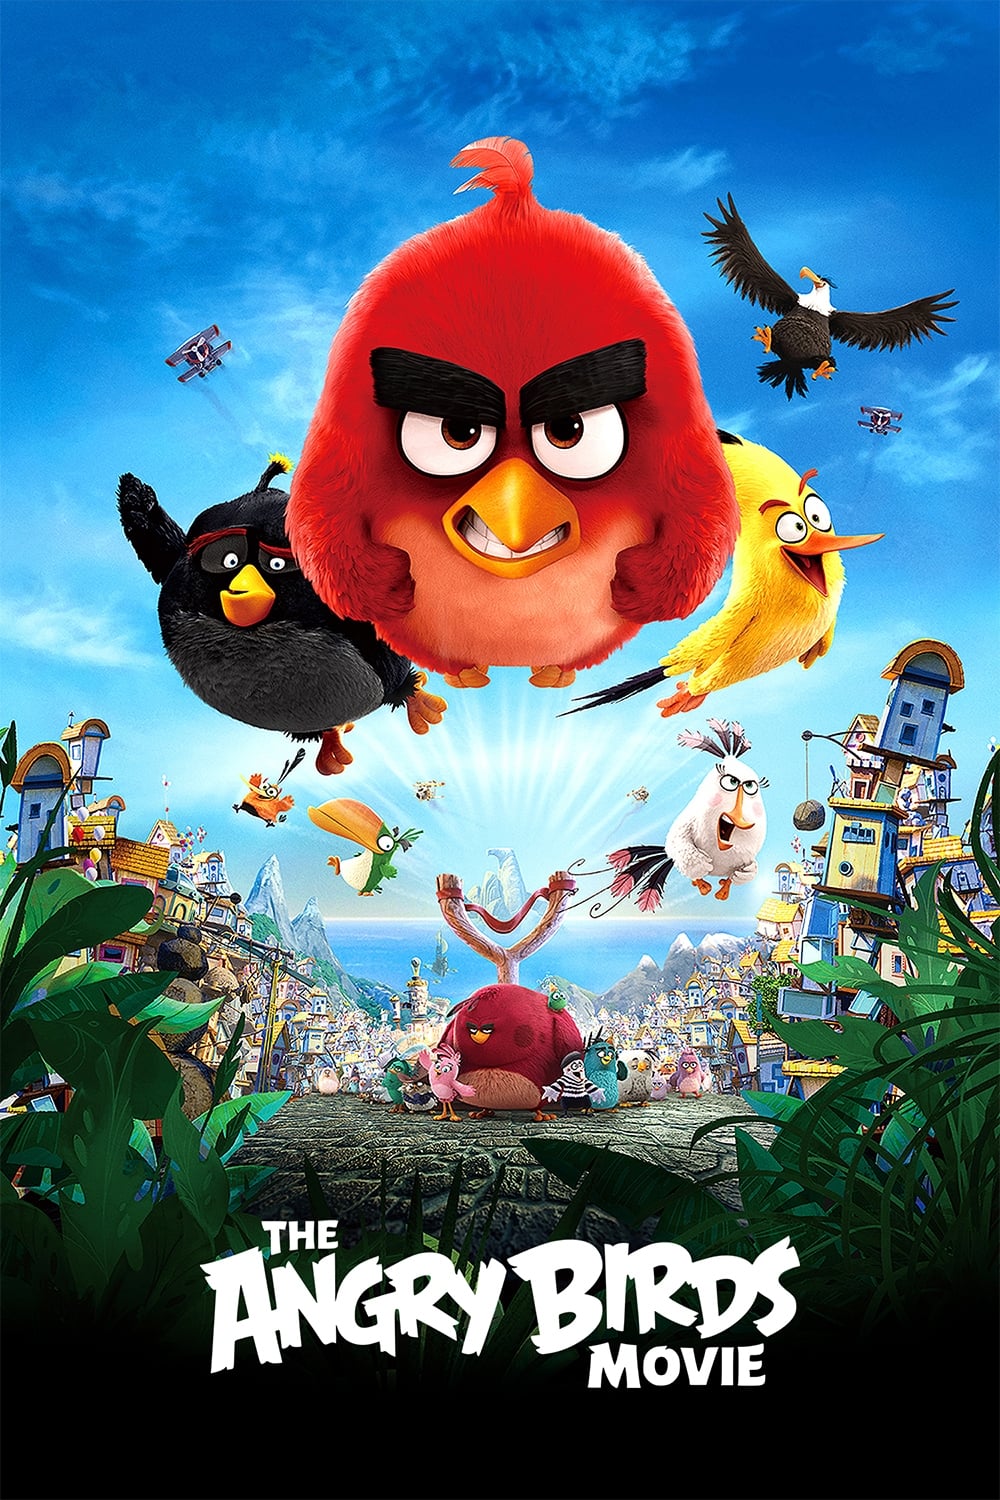 Angry Birds : Le film